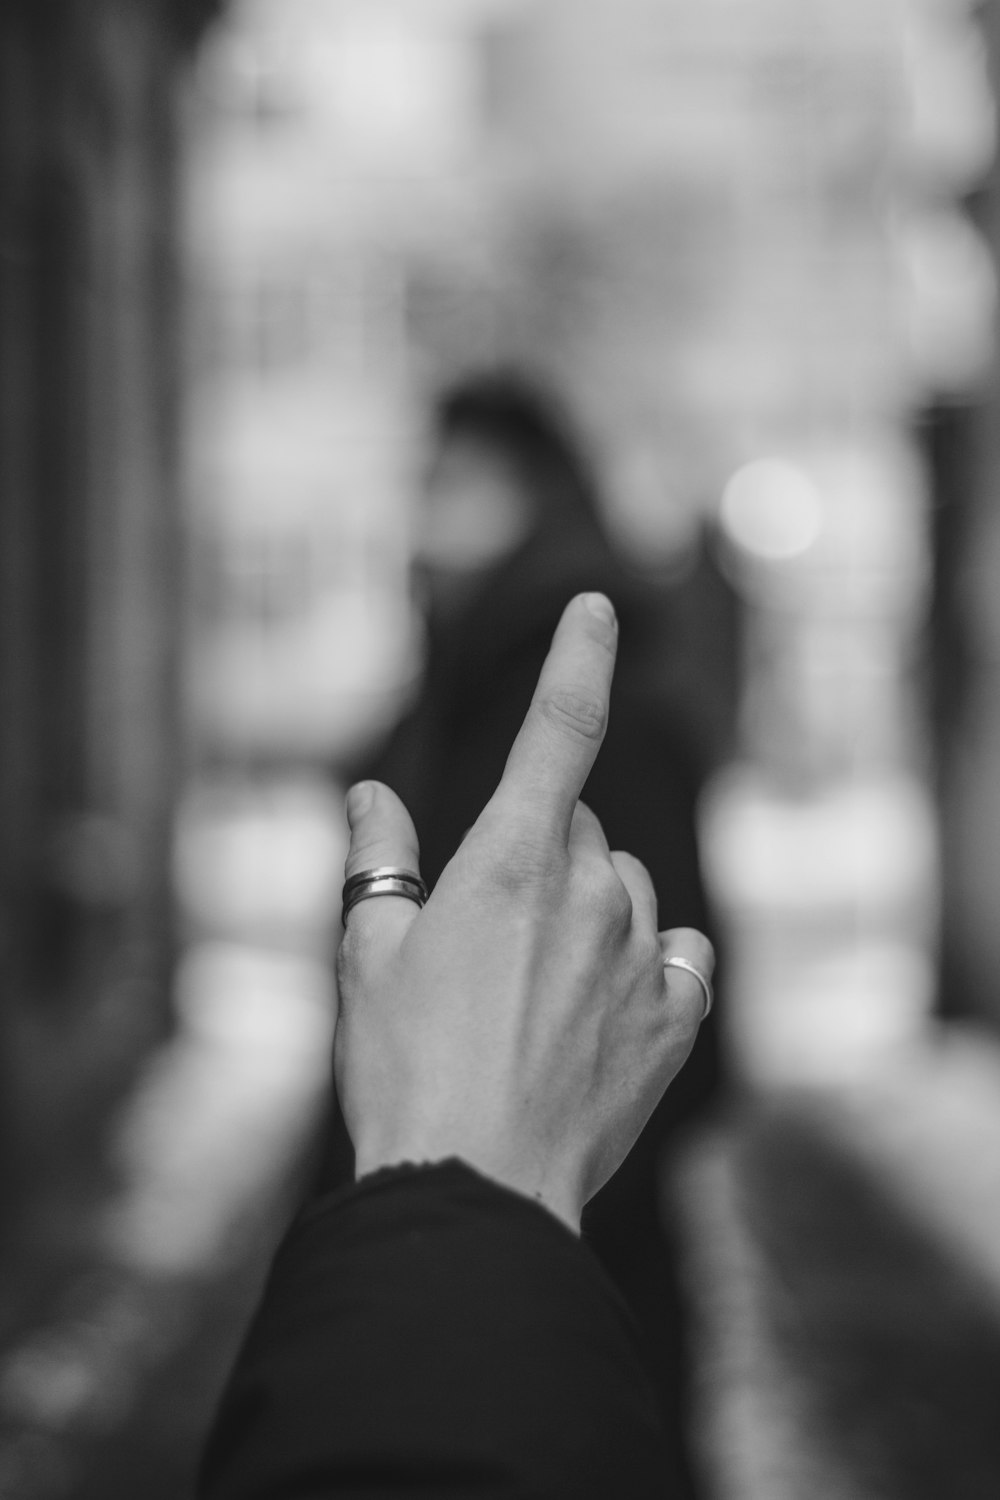 grayscale photo of person wearing ring